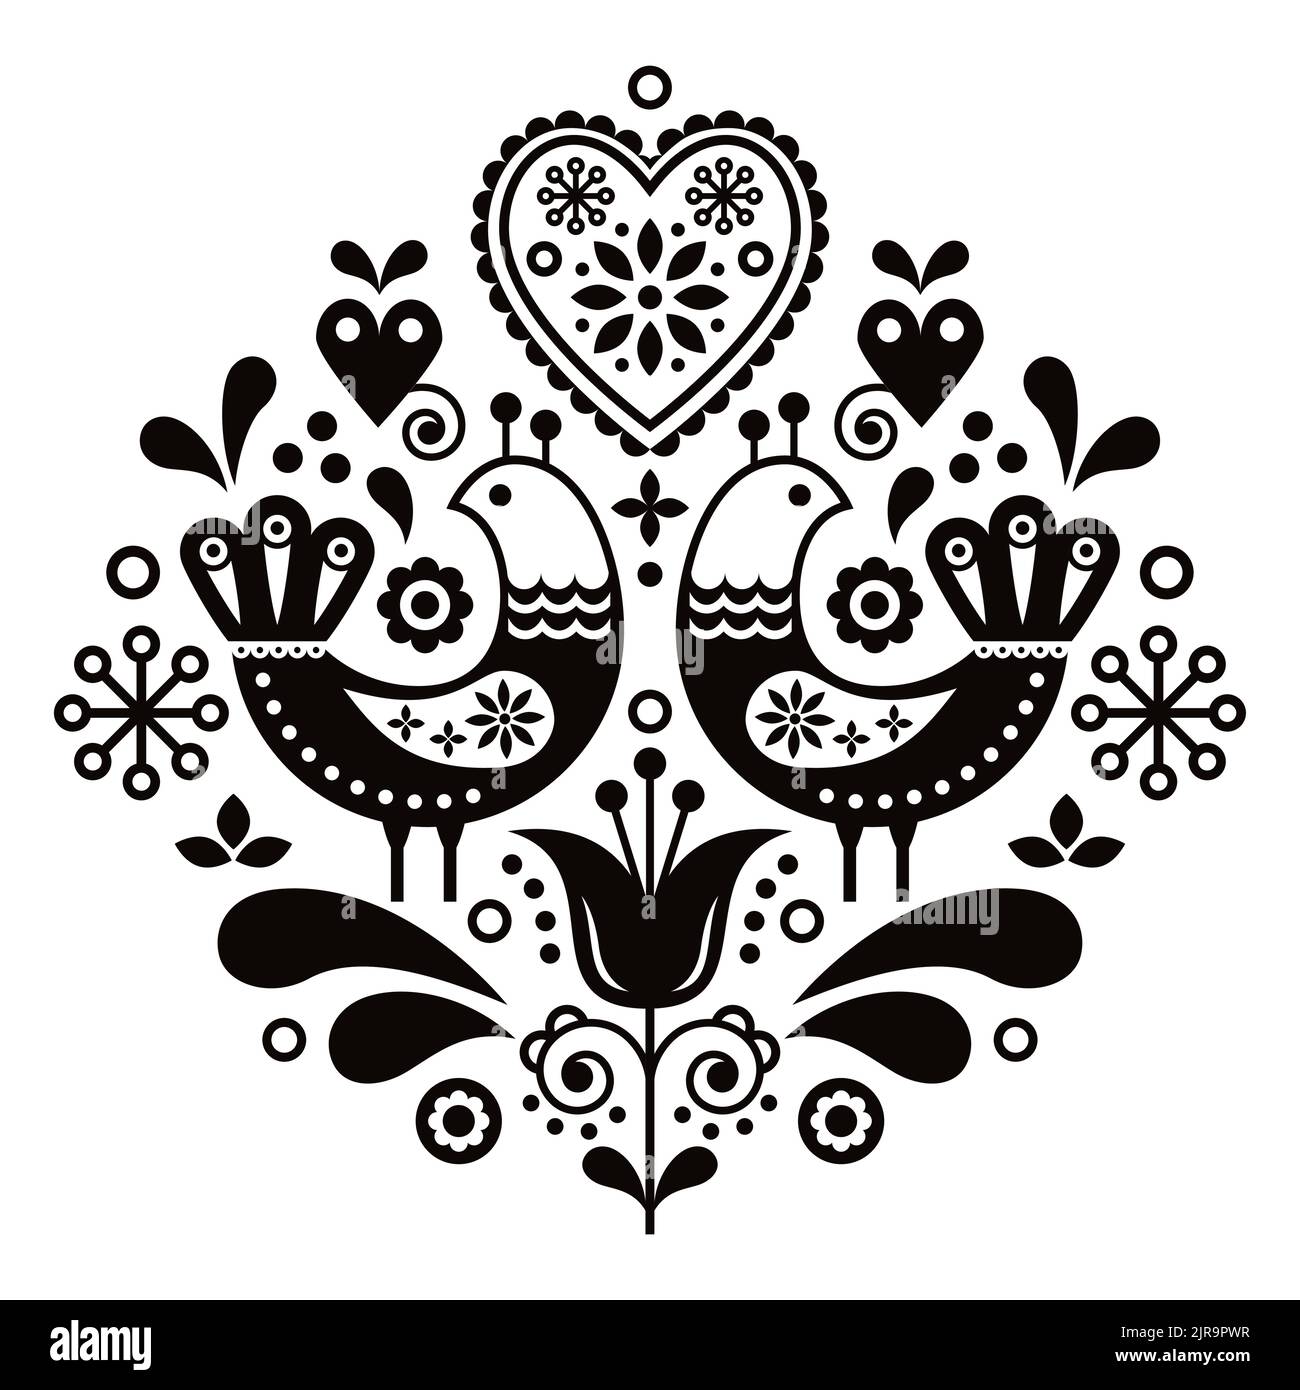 Scandinavian folk art pattern with birds and flowers, Nordic floral ...